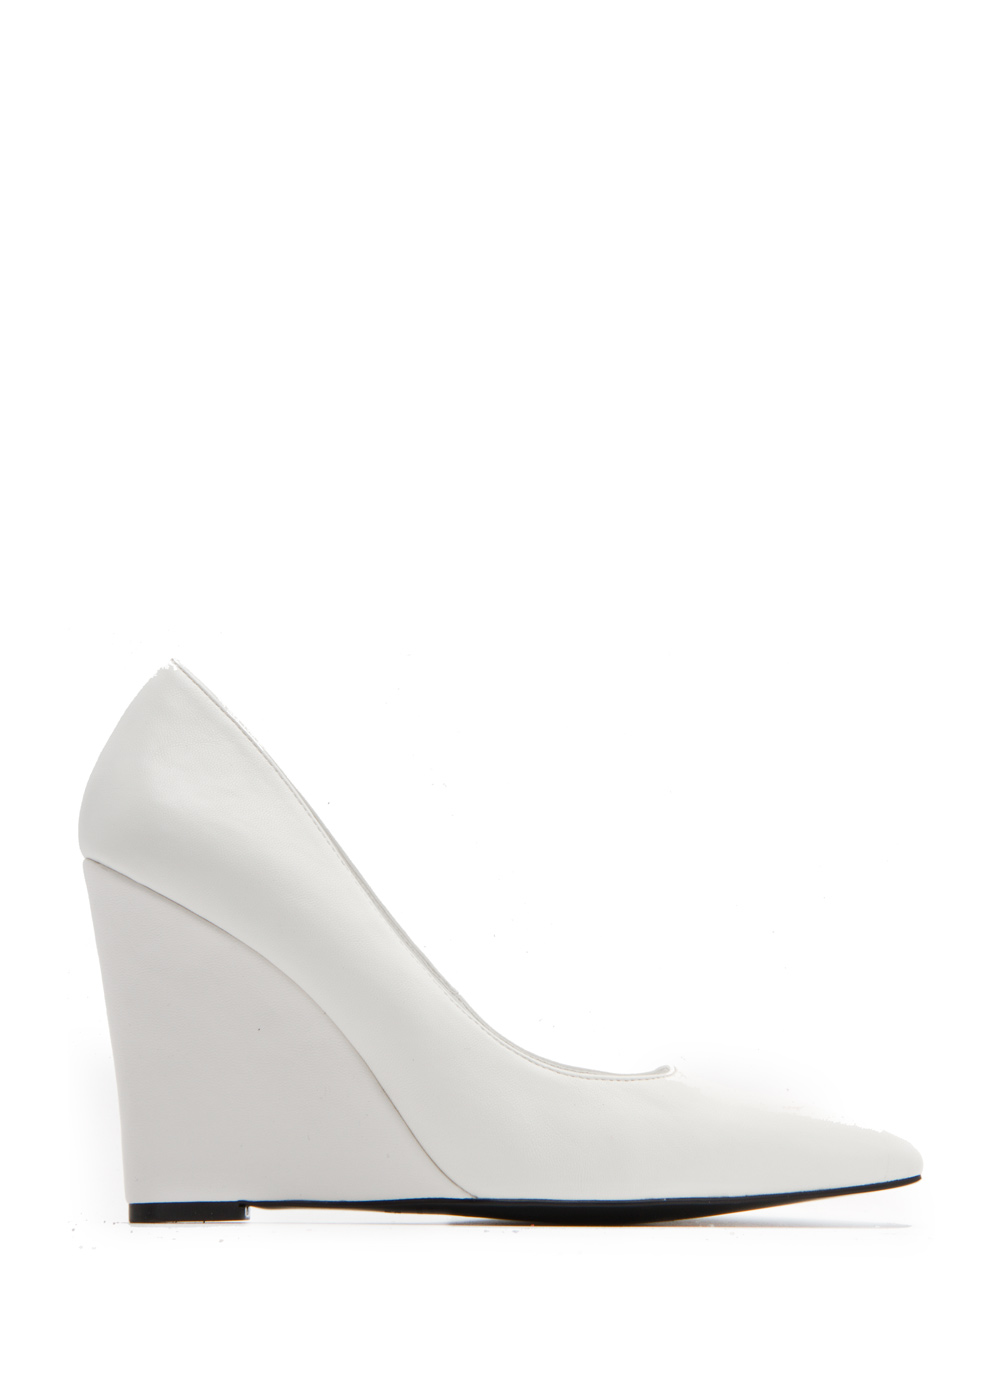 Mango Wedge Shoes in White (01) | Lyst